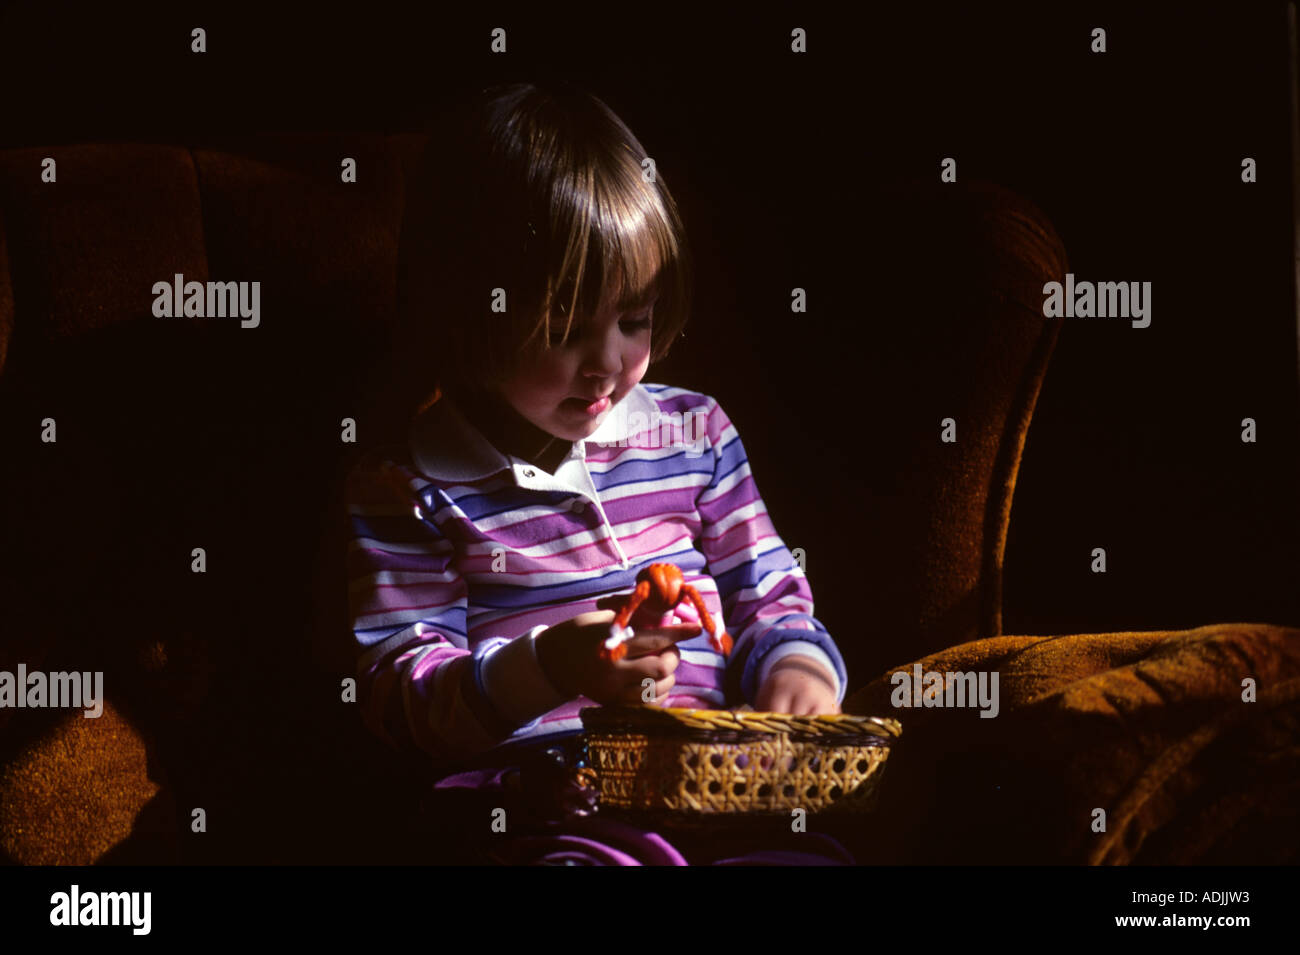 Girl paying with dolls Stock Photo